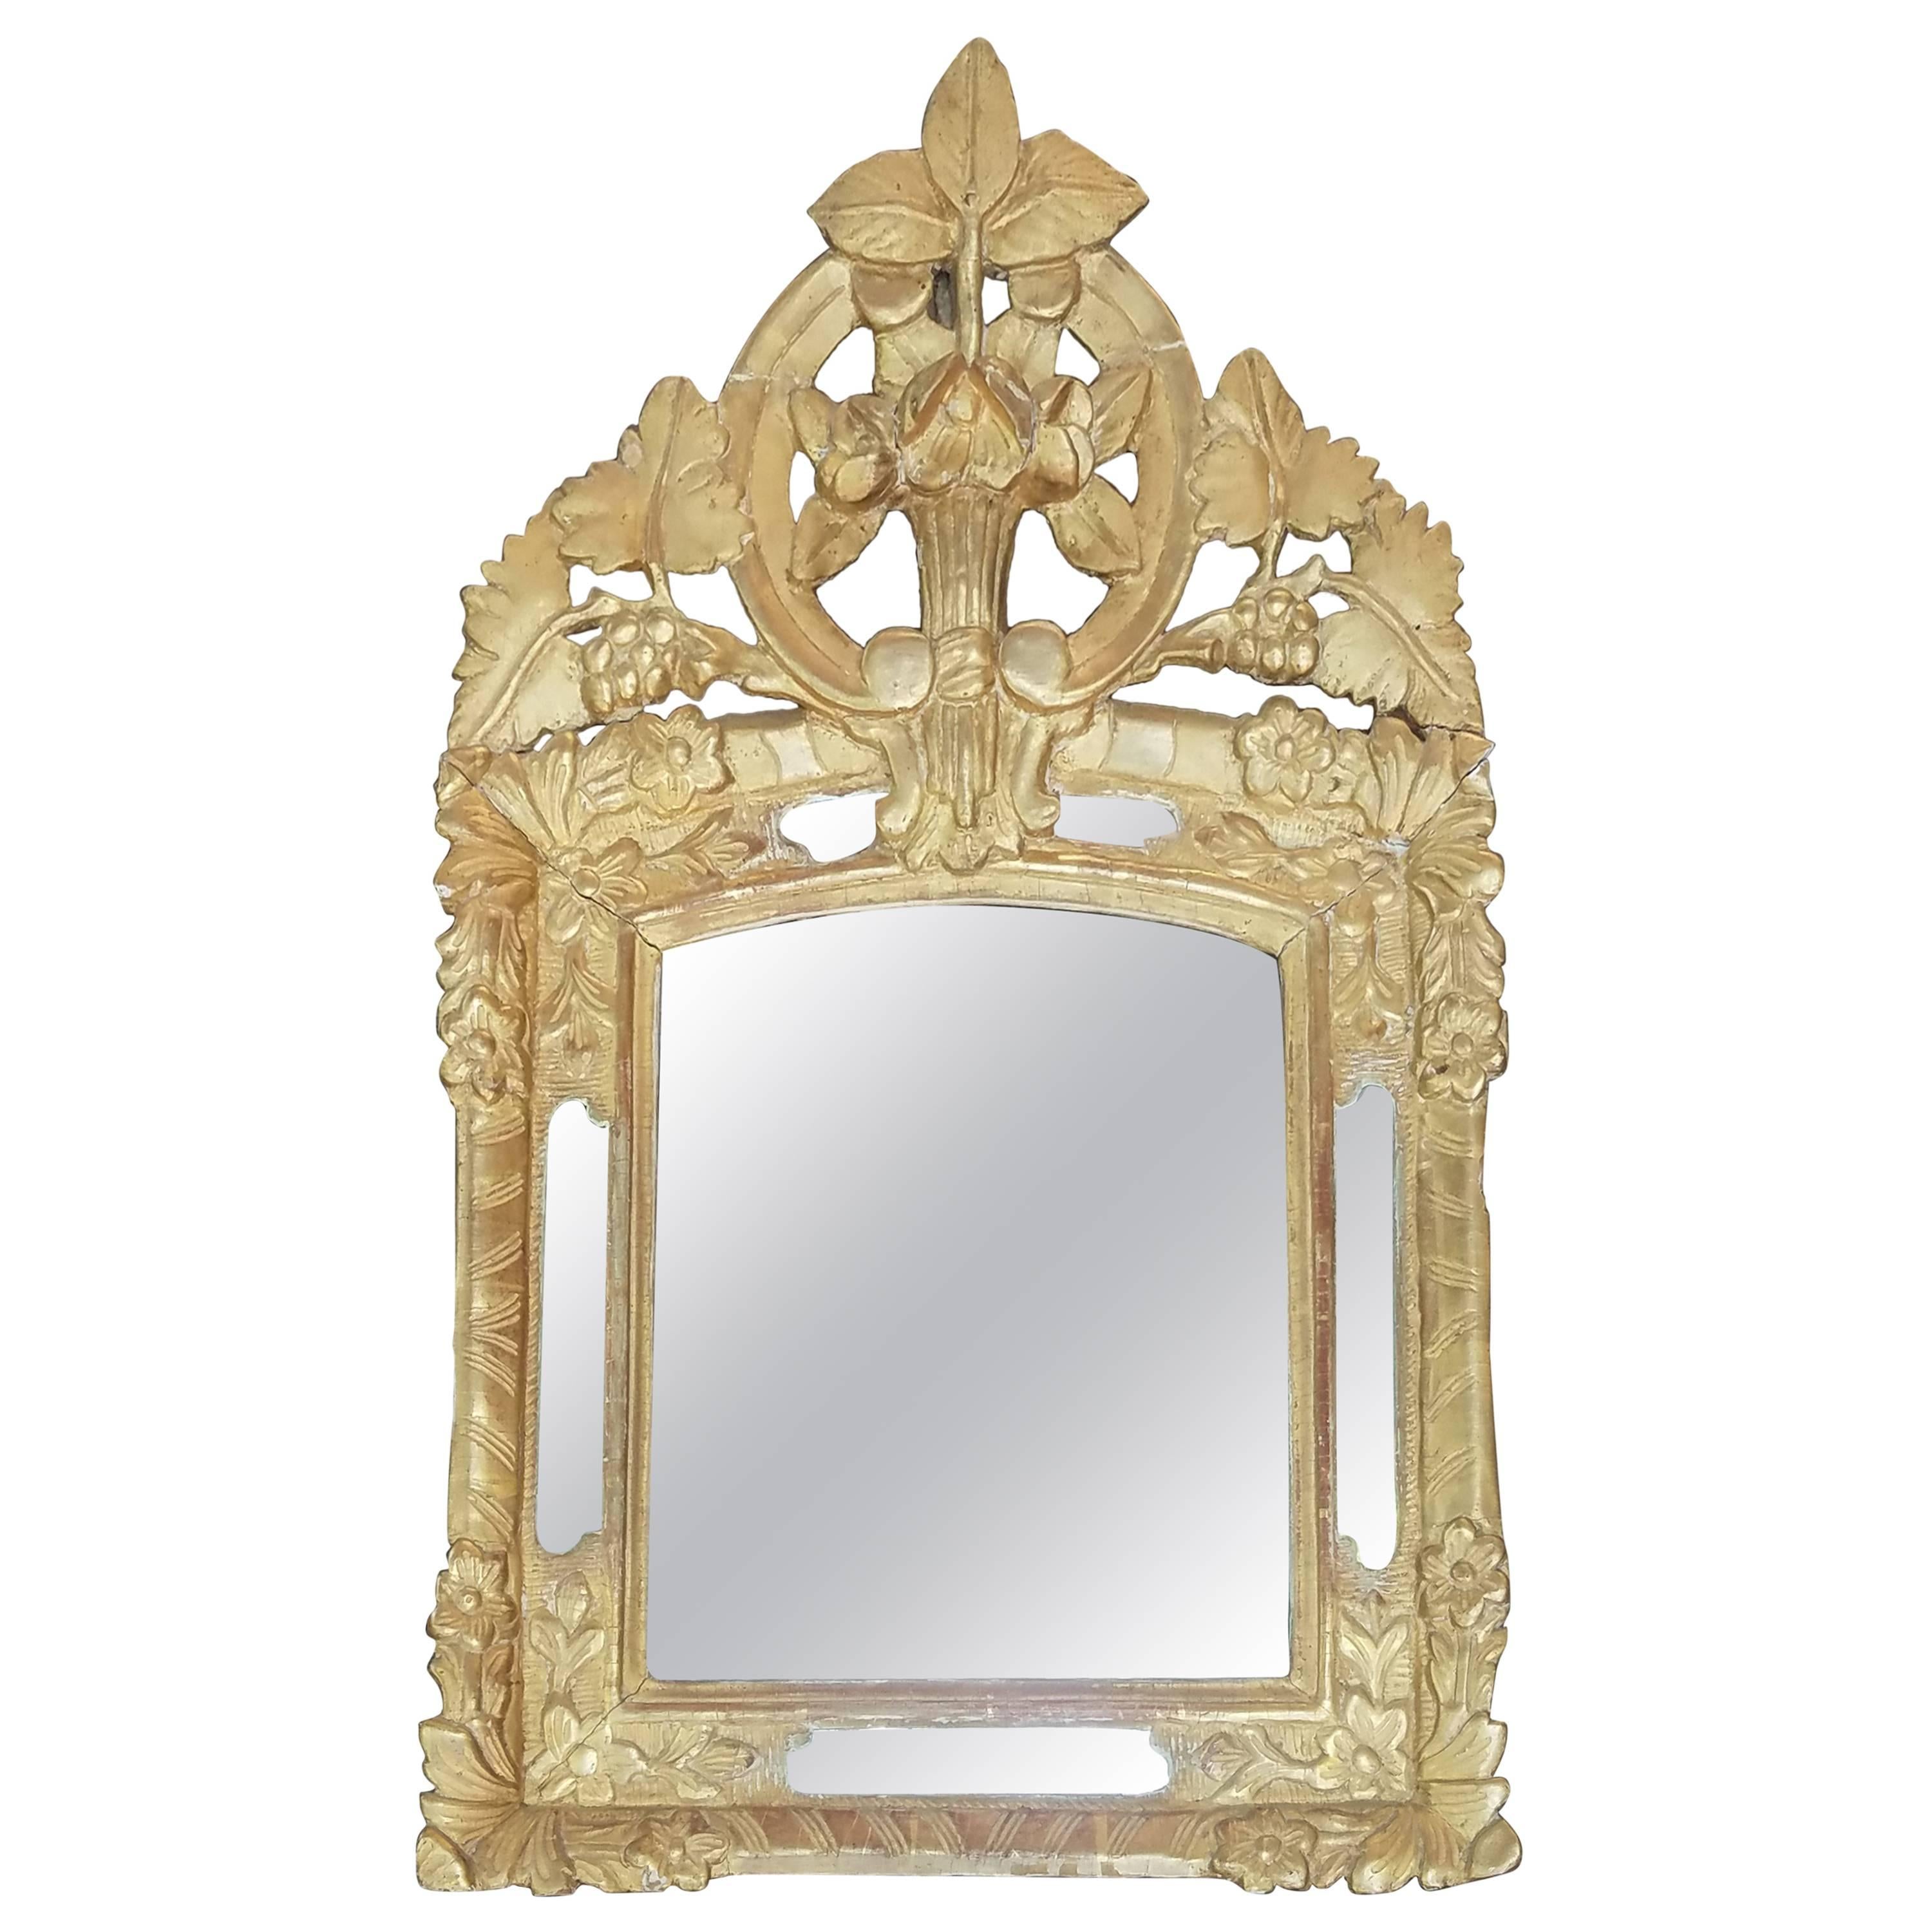  18th Century French Giltwood  Mirror from Provence with Grape and Rose Motif